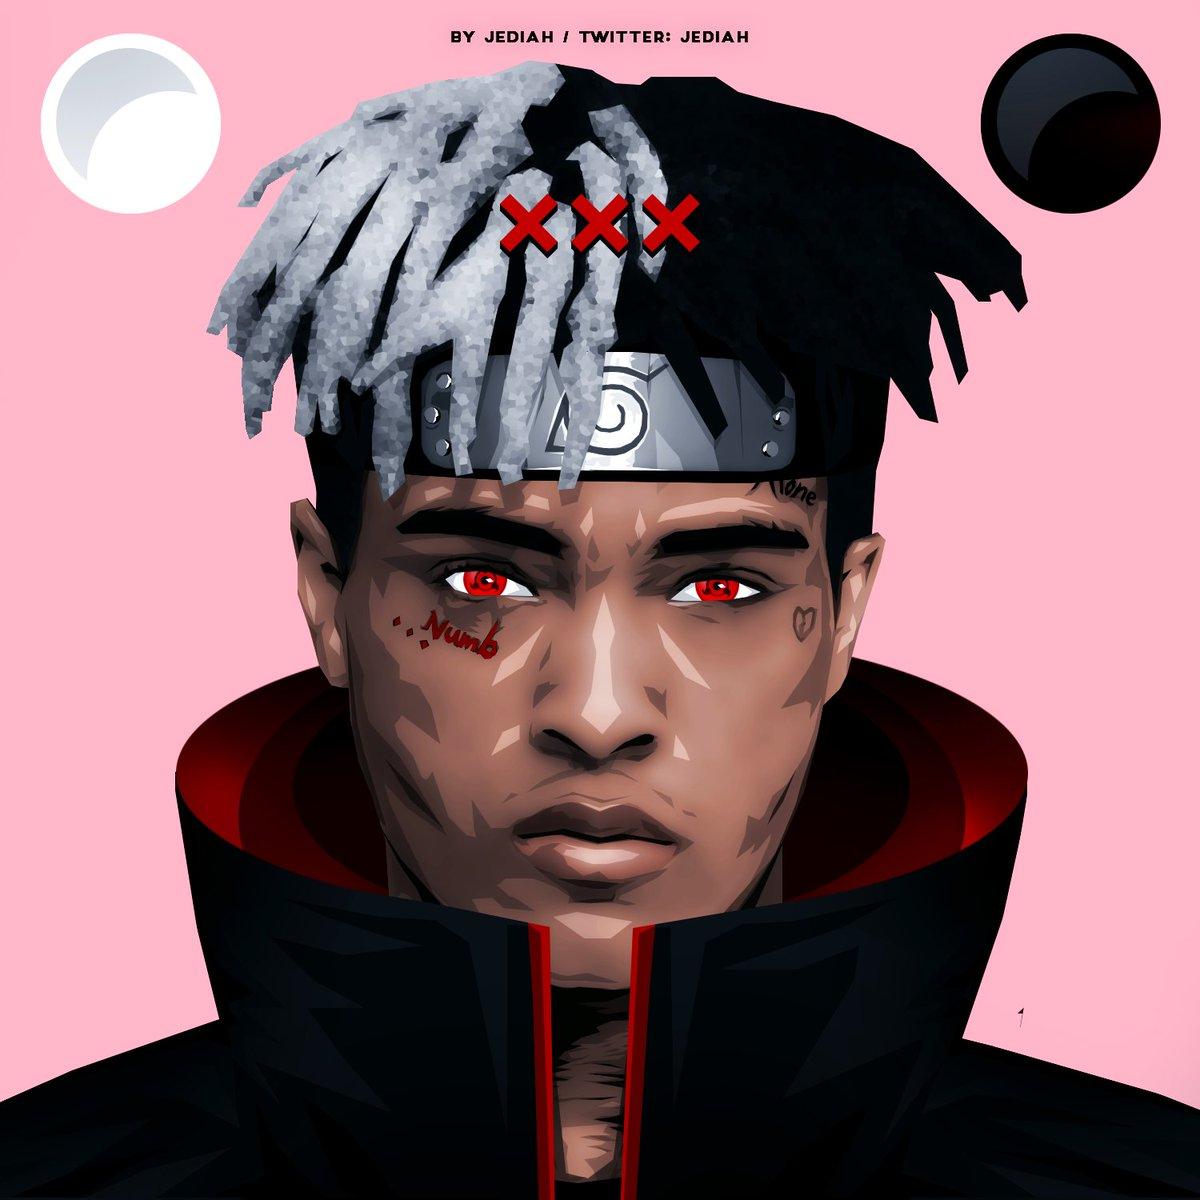 Why is there so much fan art of XXXTentacion as a naruto